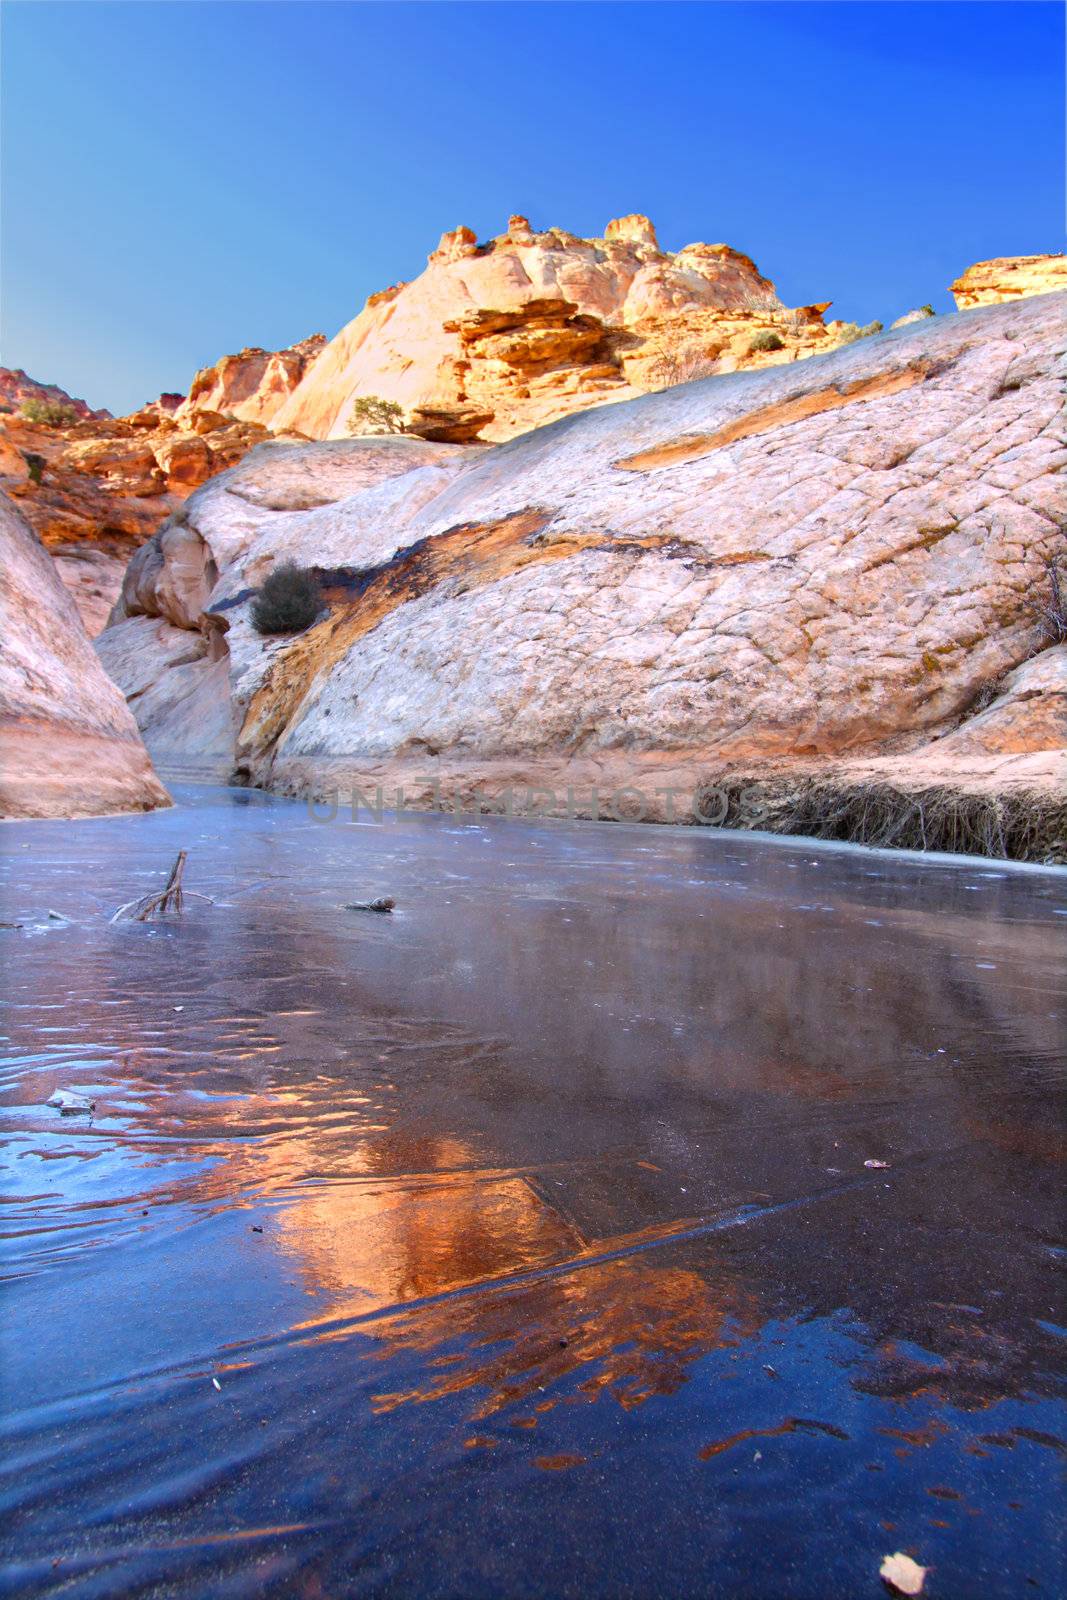 The Tanks Capitol Reef National Park by Wirepec